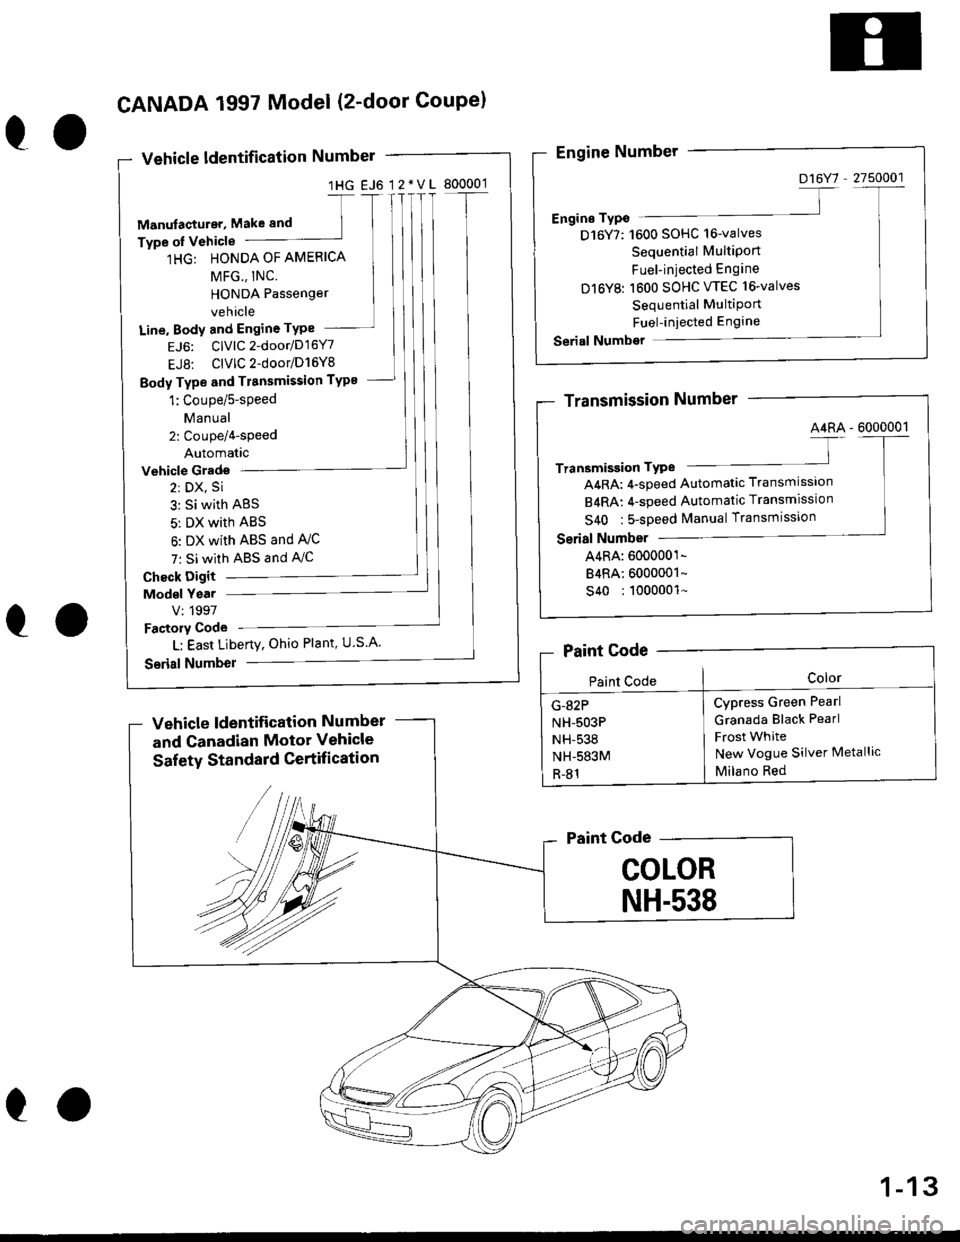 HONDA CIVIC 1998 6.G User Guide 1HG EJ6 12*VL 800001
1HG: HONDA OF AMERICA
Line, Body and Engine TYPe
EJ6: ClvlC2-door/D16Y7
EJ8: ClVlC2-door/D16Y8
Body Type and Tr8nsmission TYP8
Vehicle Grado
2: DX, Si
3: Si with ABS
5: DX with AB